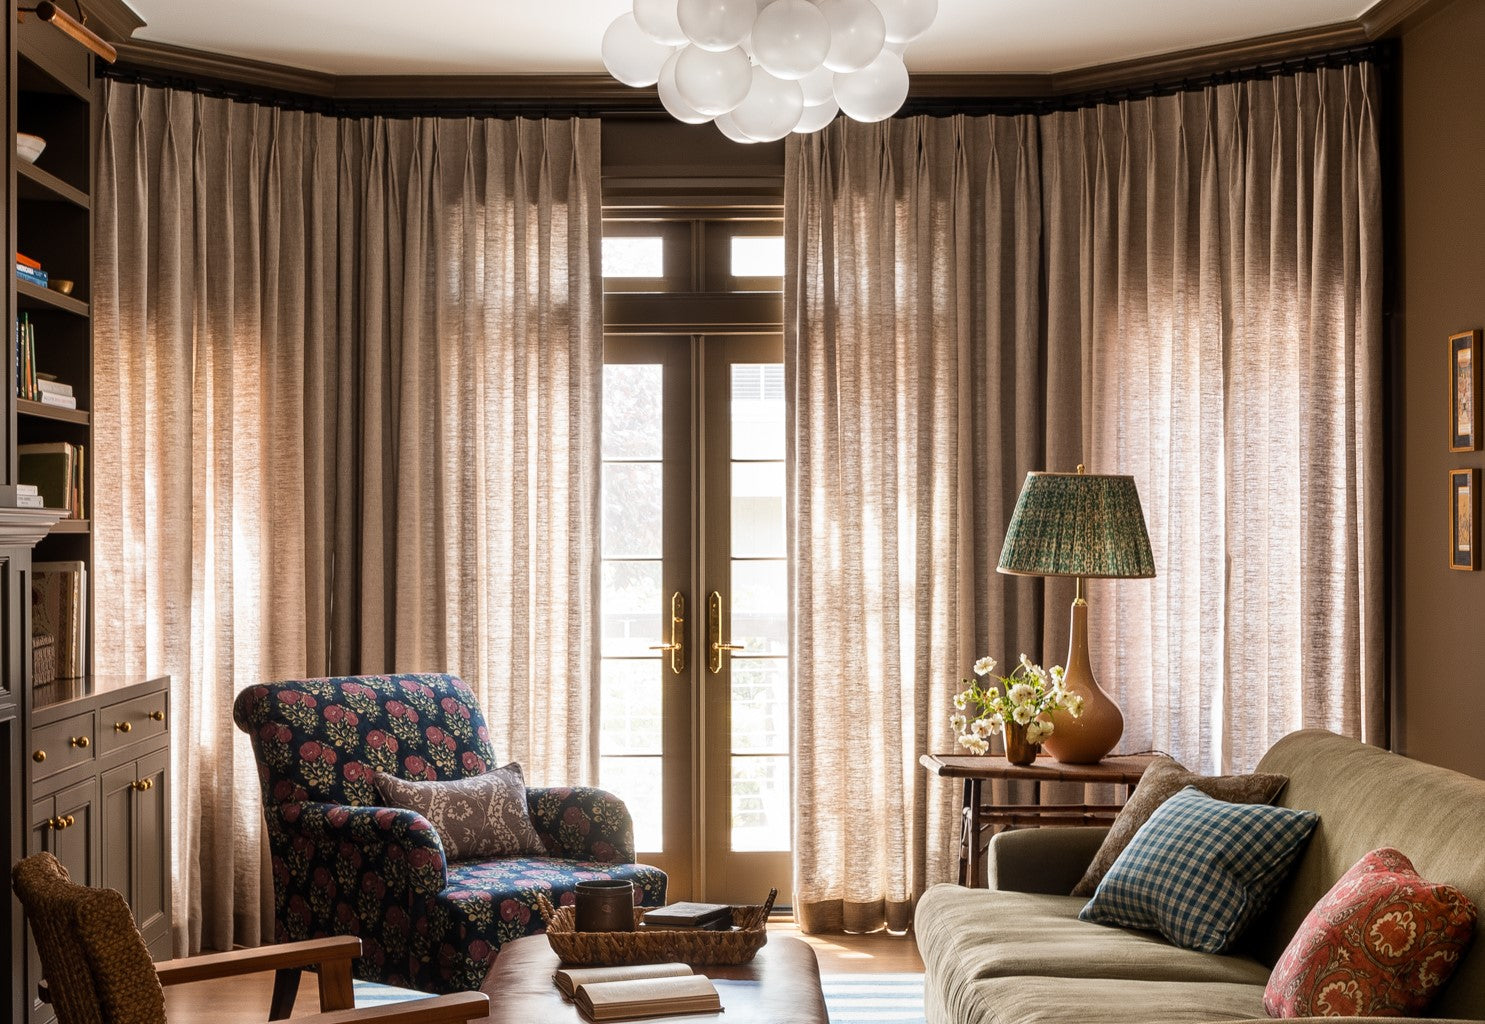 Double pinch pleat curtains and drapes